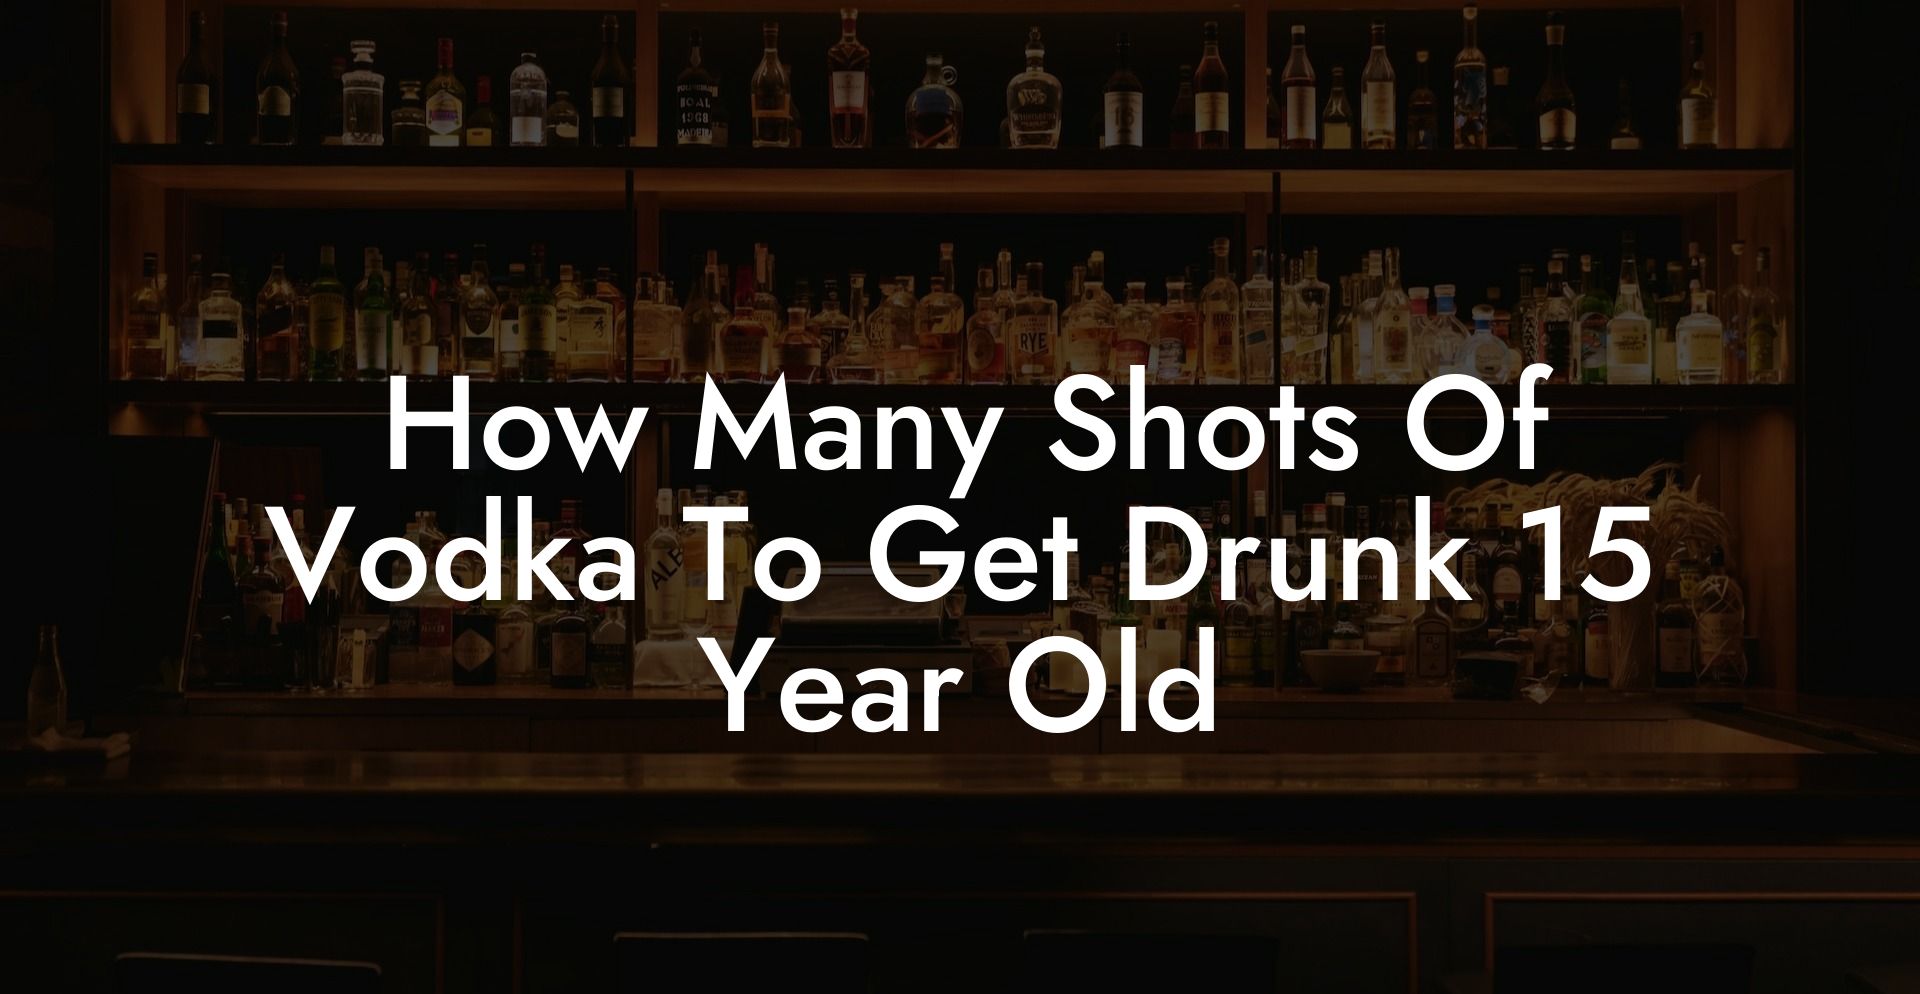 How Many Shots Of Vodka To Get Drunk 15 Year Old